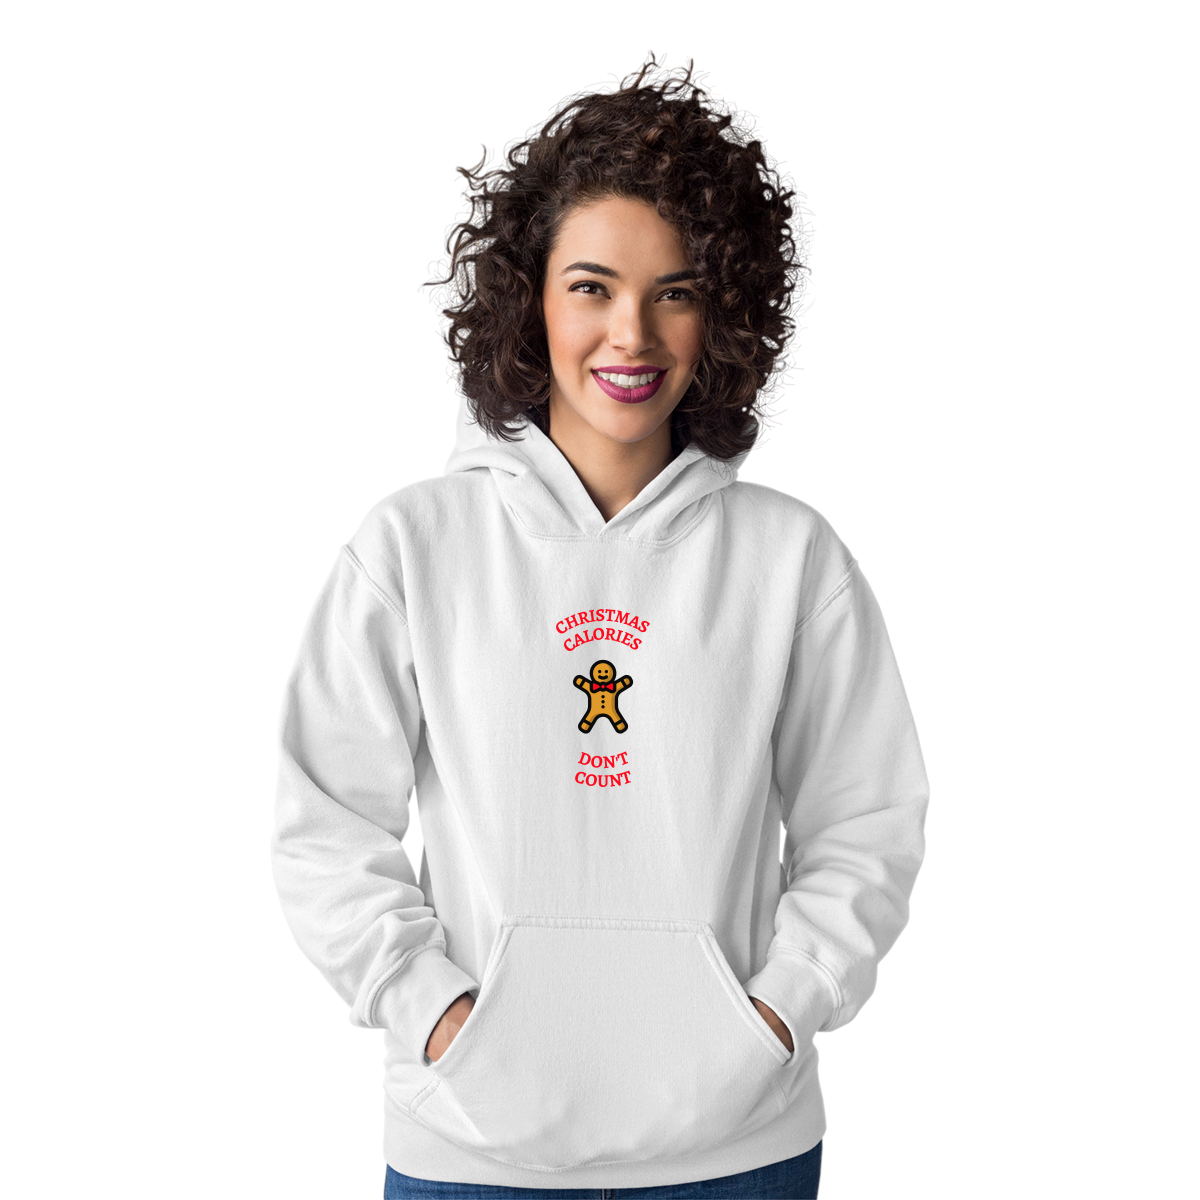 Christmas Calories Don't Count Unisex Hoodie | White